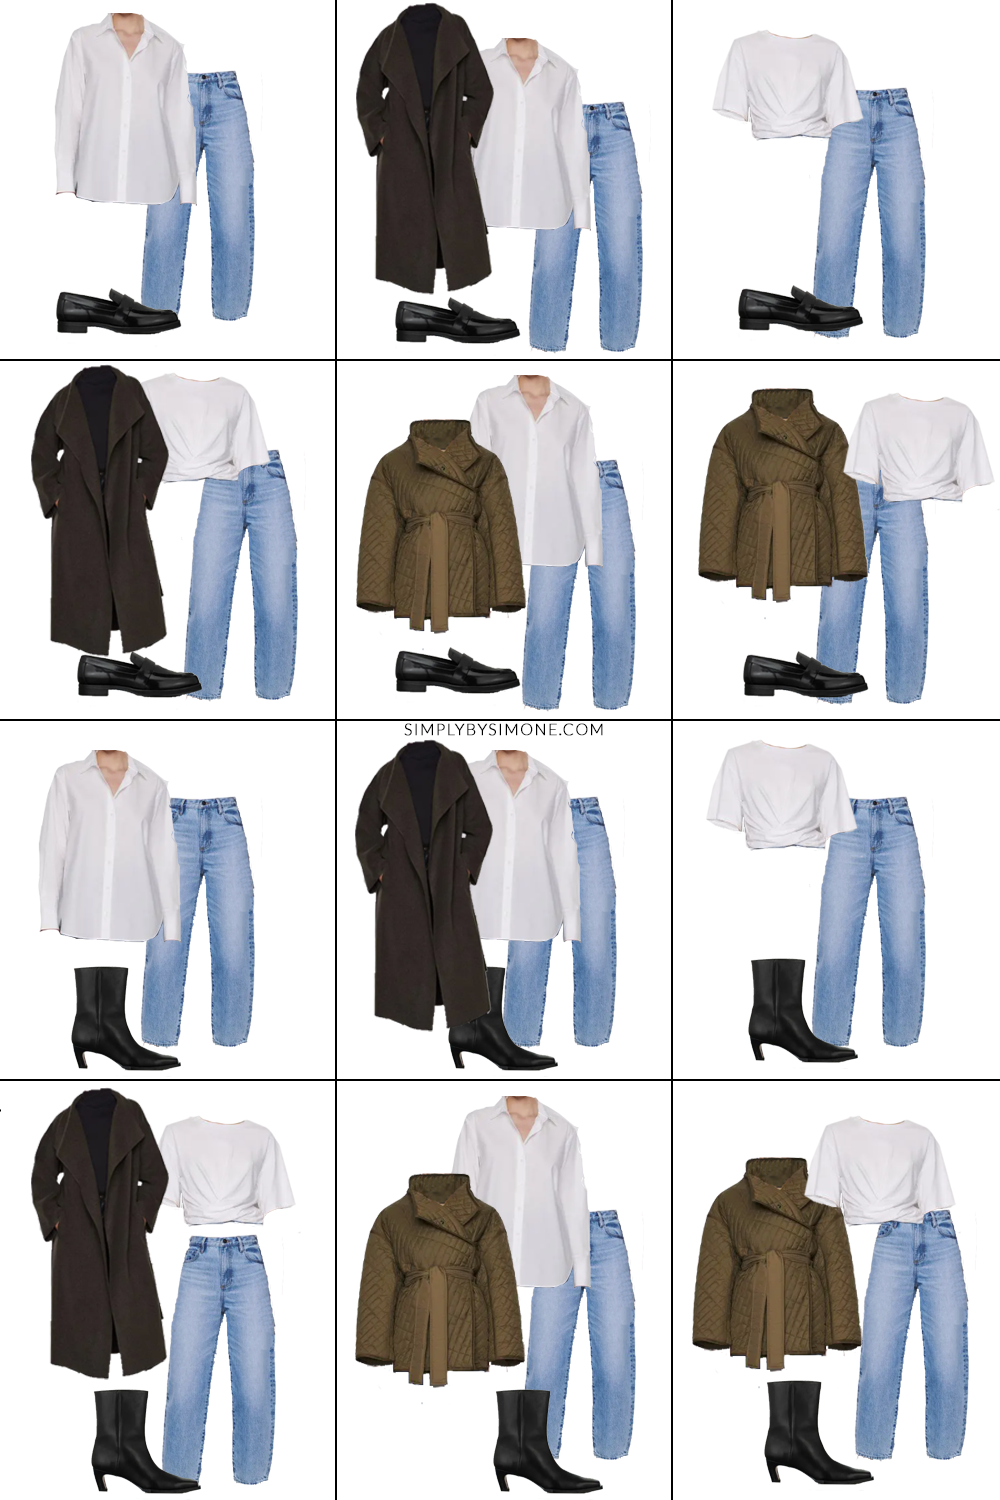 Frame Fall Capsule Wardrobe - 8 Pieces, 24 Outfits for Fall